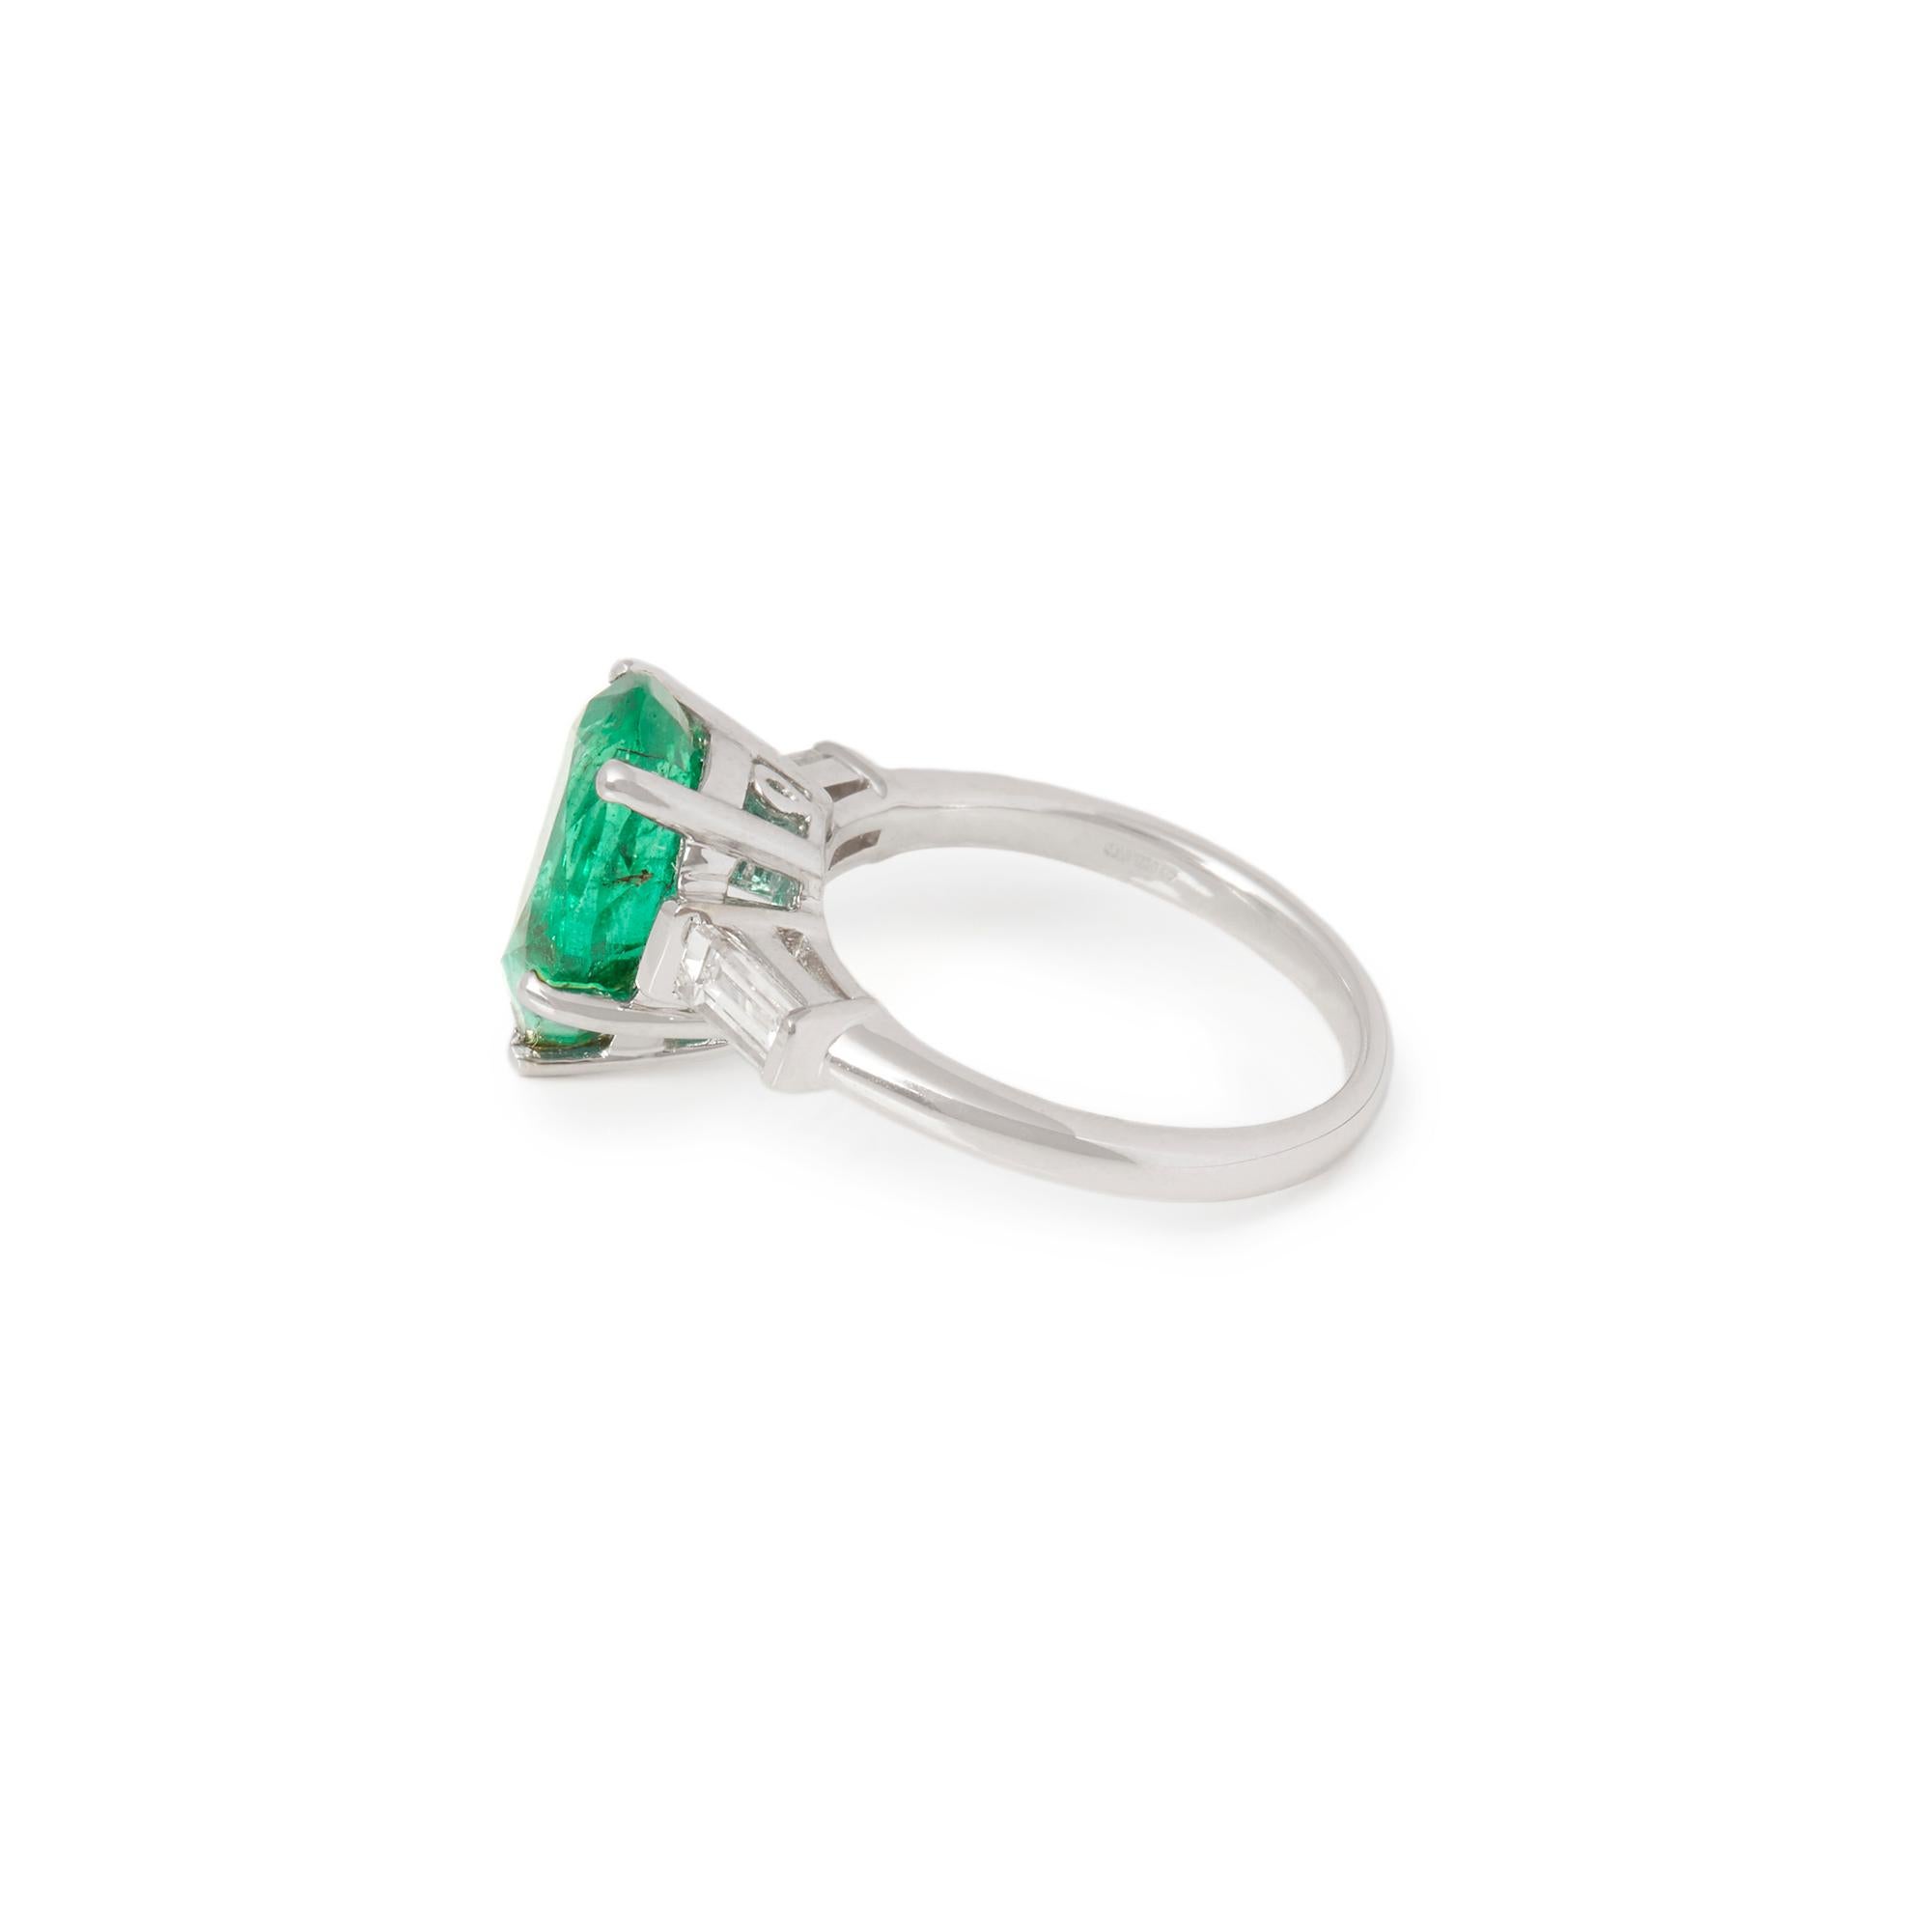 David Jerome Certified 3.45ct Pear Cut Emerald and Diamond Ring In New Condition For Sale In Bishop's Stortford, Hertfordshire